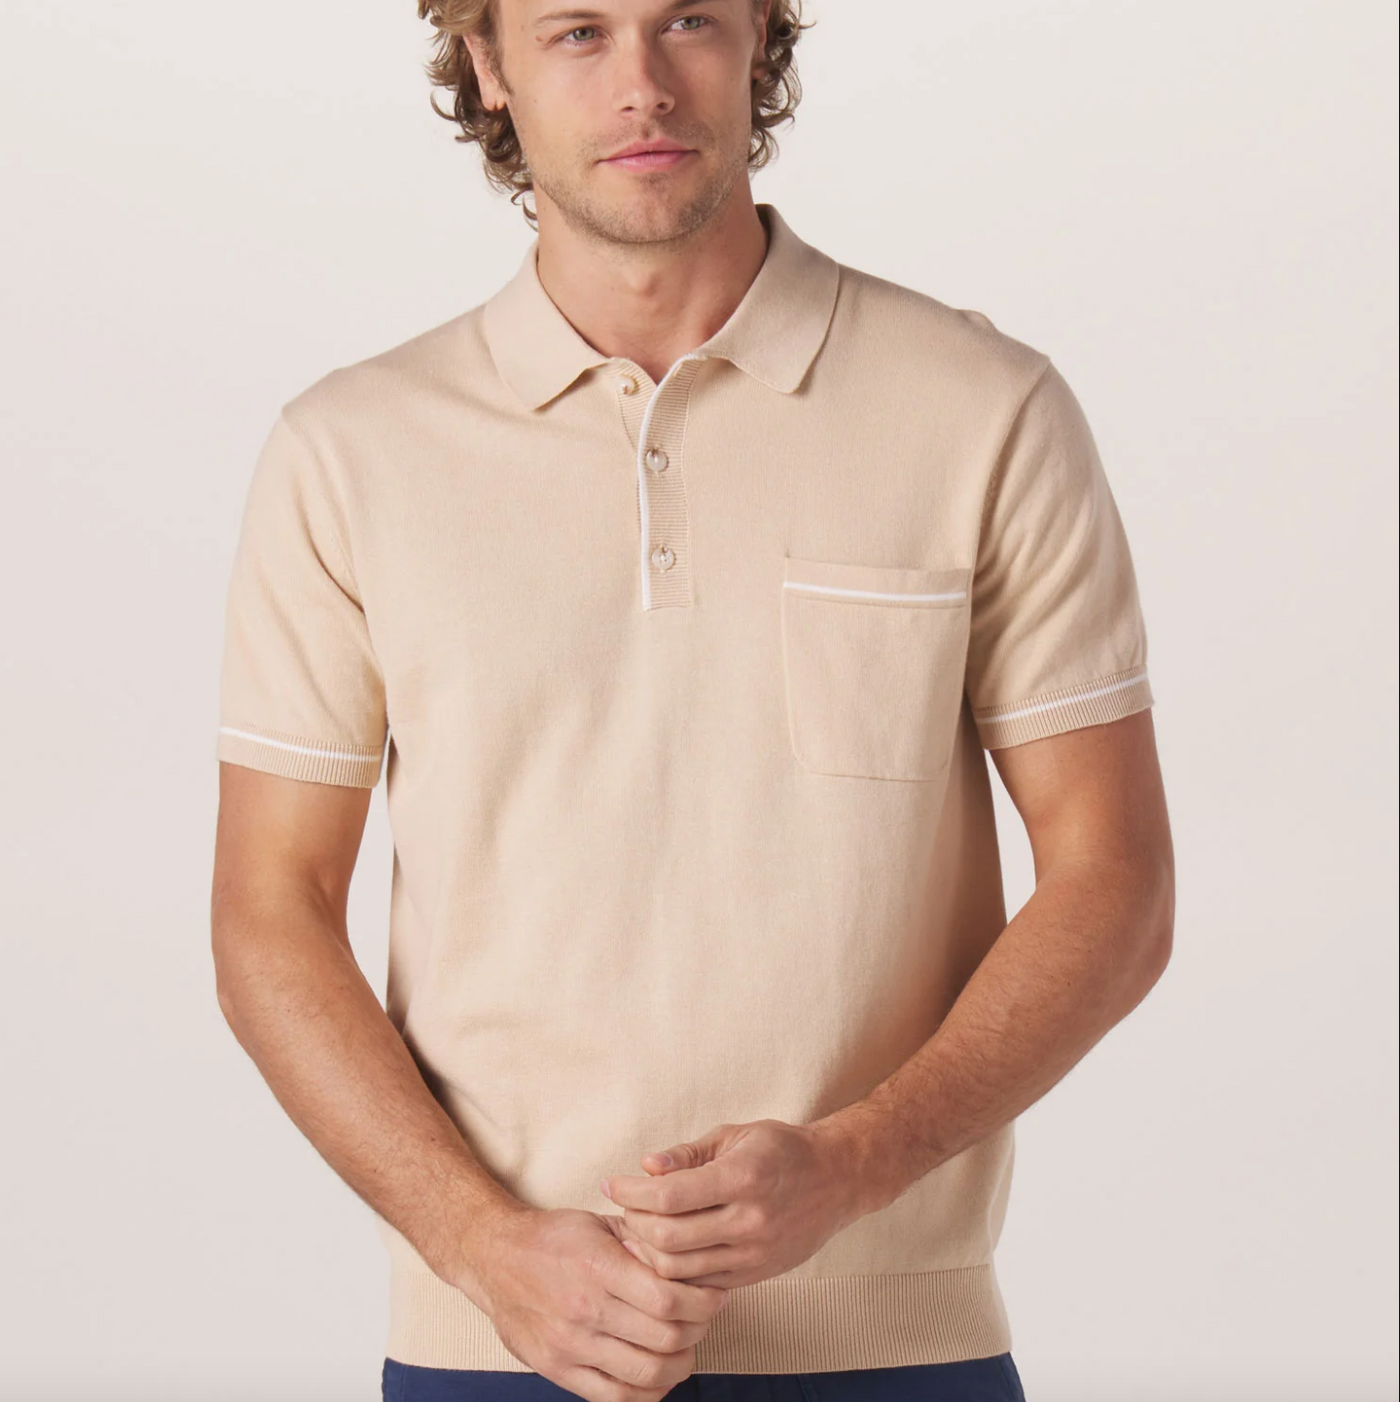 The Normal Brand - Robles Knit Polo - Tan/White